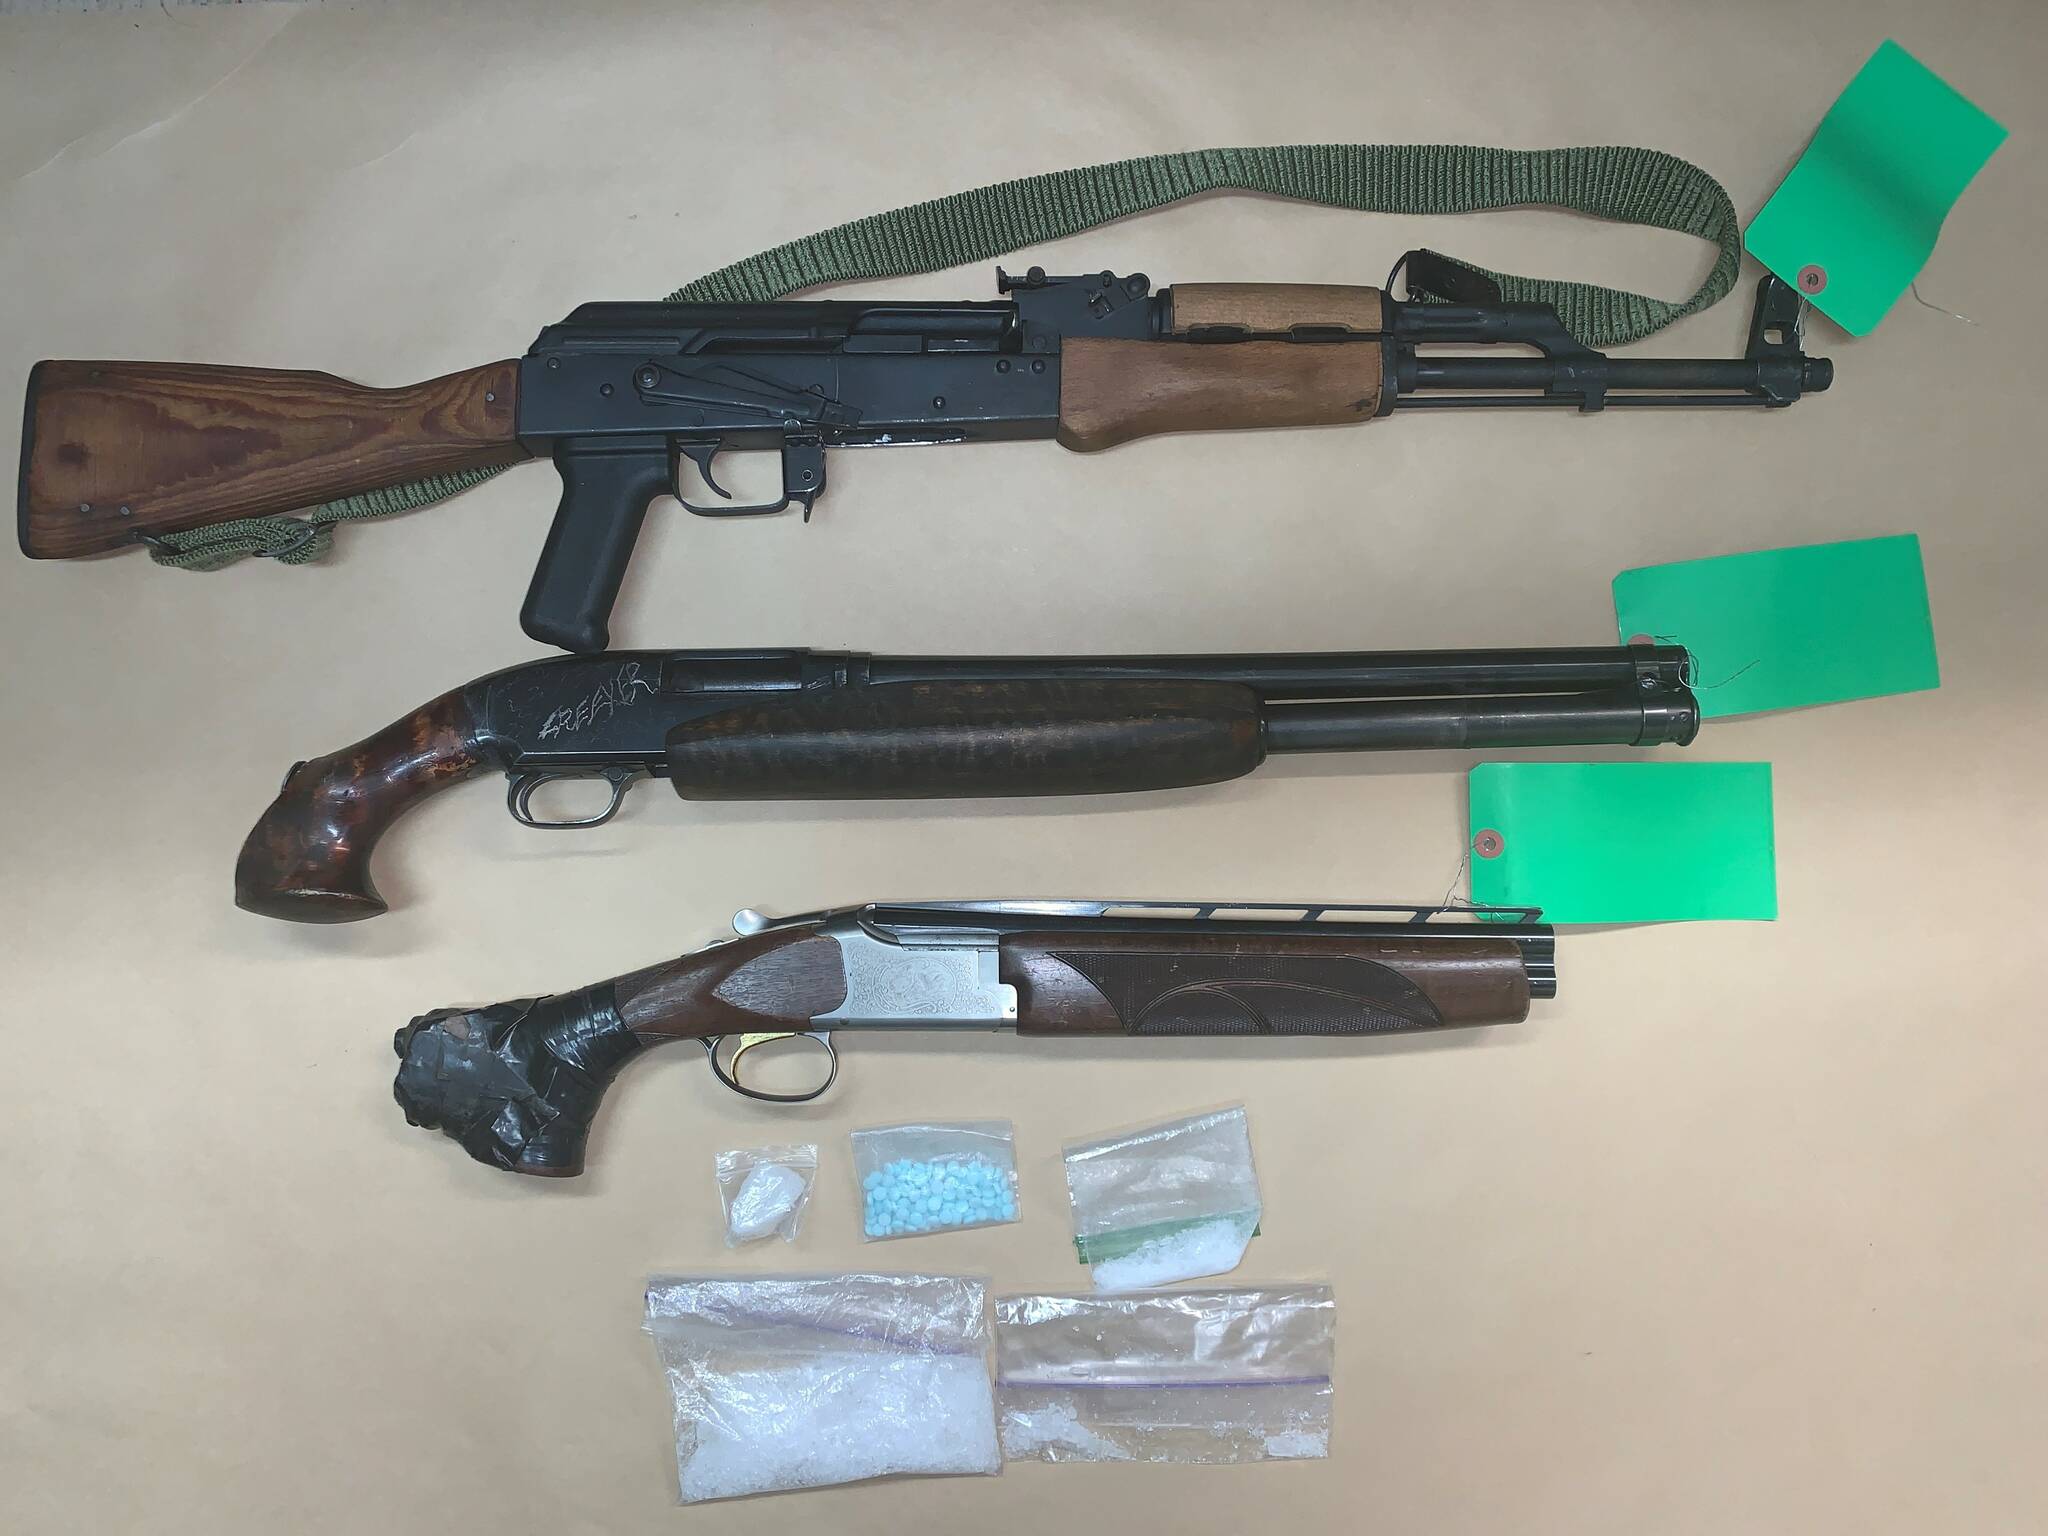 Oak Harbor police searched two cars and discovered sawed-off shotguns, an AK-47, meth and fentanyl. (Oak Harbor police image)